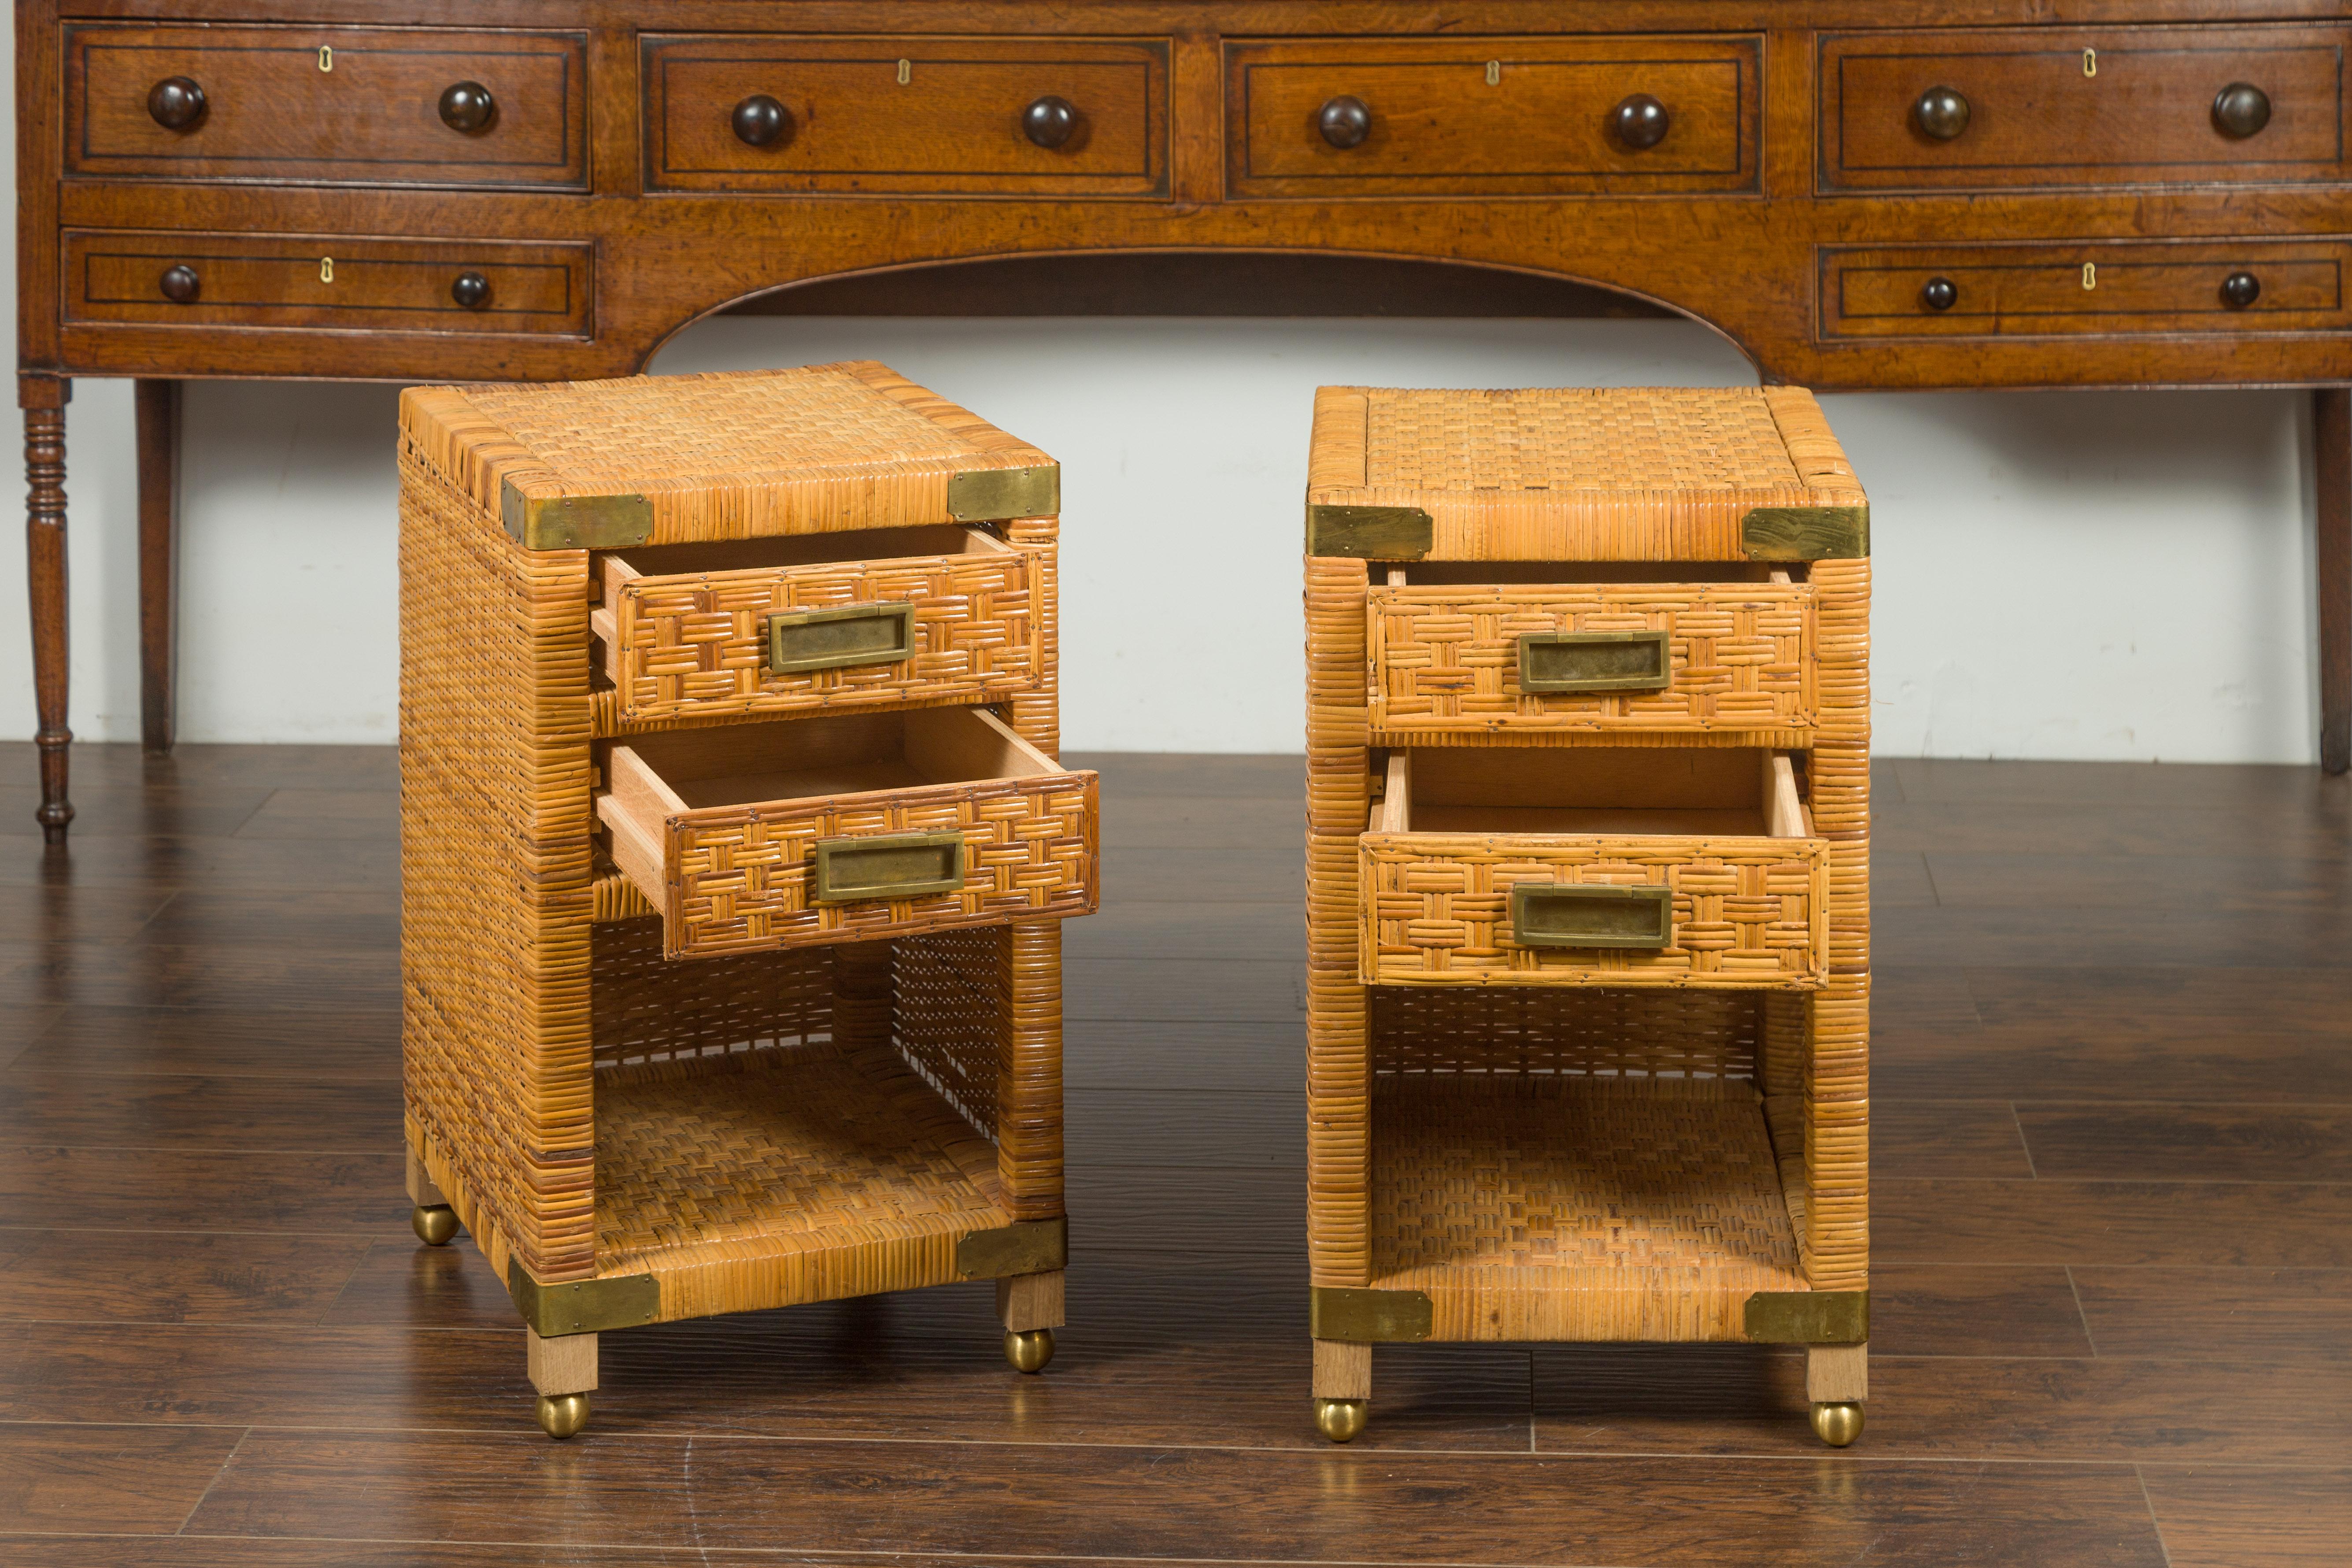 20th Century Pair of Midcentury Asian Rattan Bedside Tables with Drawers and Brass Accents